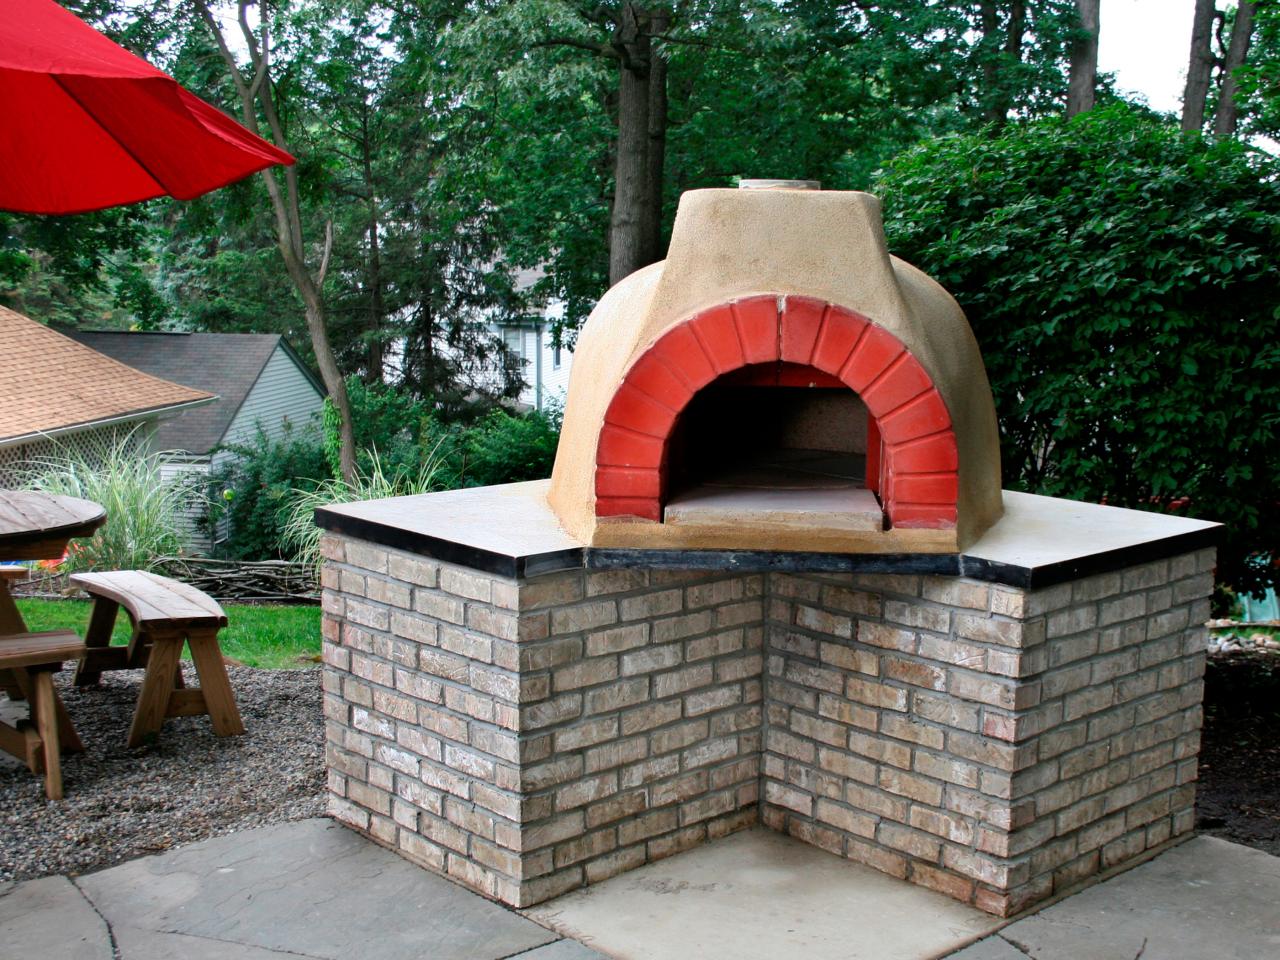 How To Build An Outdoor Pizza Oven, Building An Outdoor Pizza Brick Oven